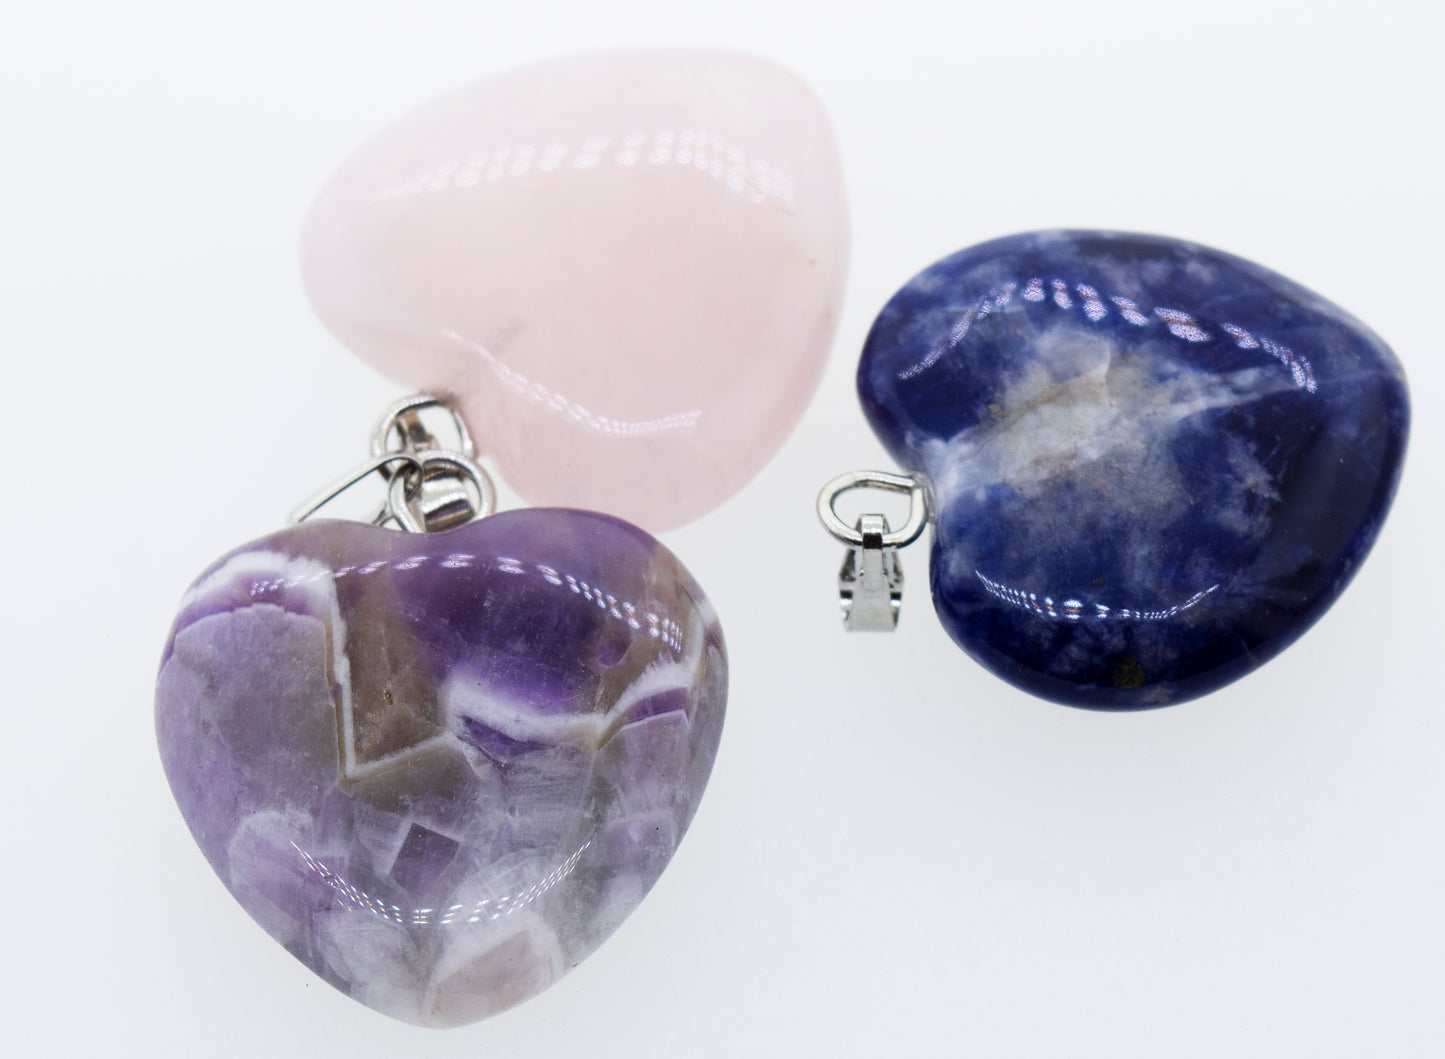 Three Super Silver Heart Stone Pendants, suitable for everyday wear, displayed on a white surface.